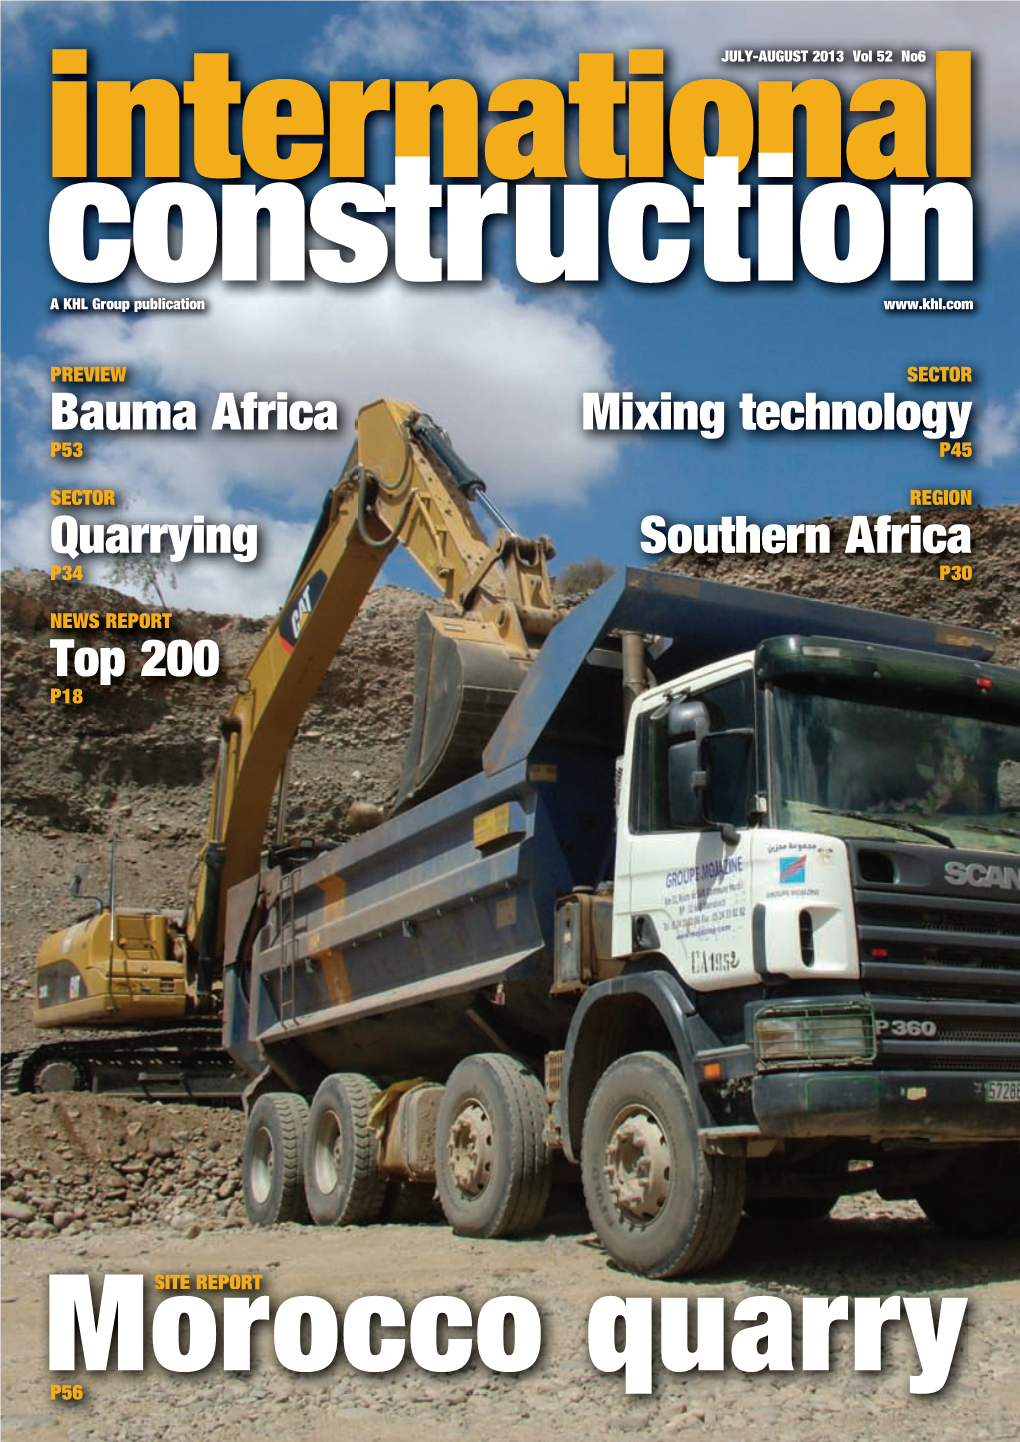 Mixing Technology Southern Africa Bauma Africa Quarrying Top